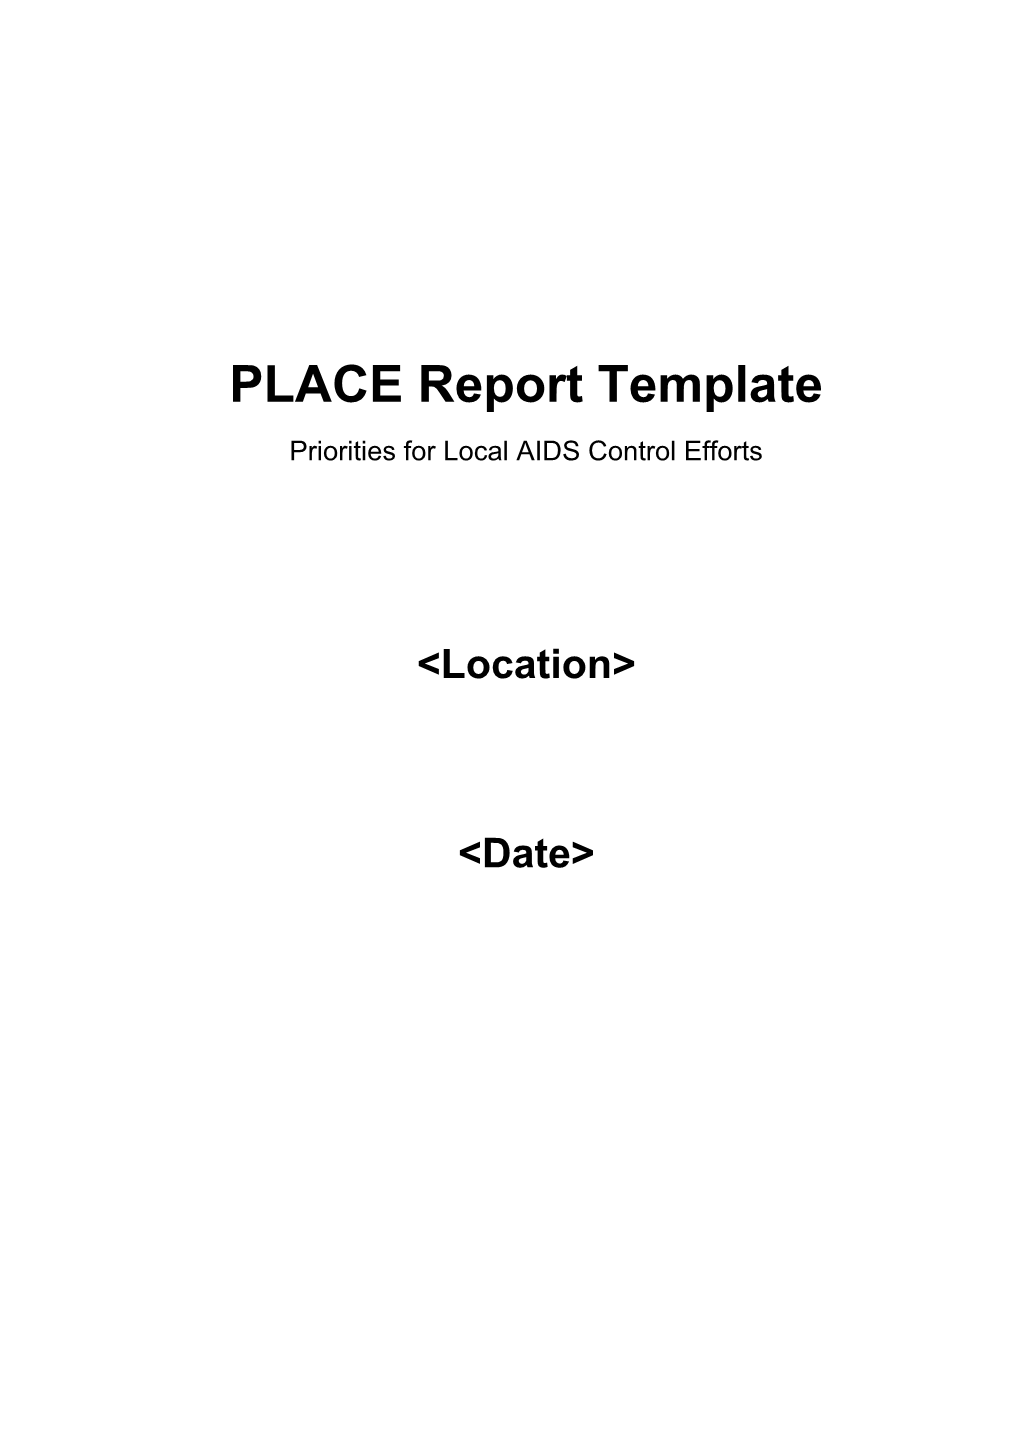 Instructions on How to Use the PLACE Report Template